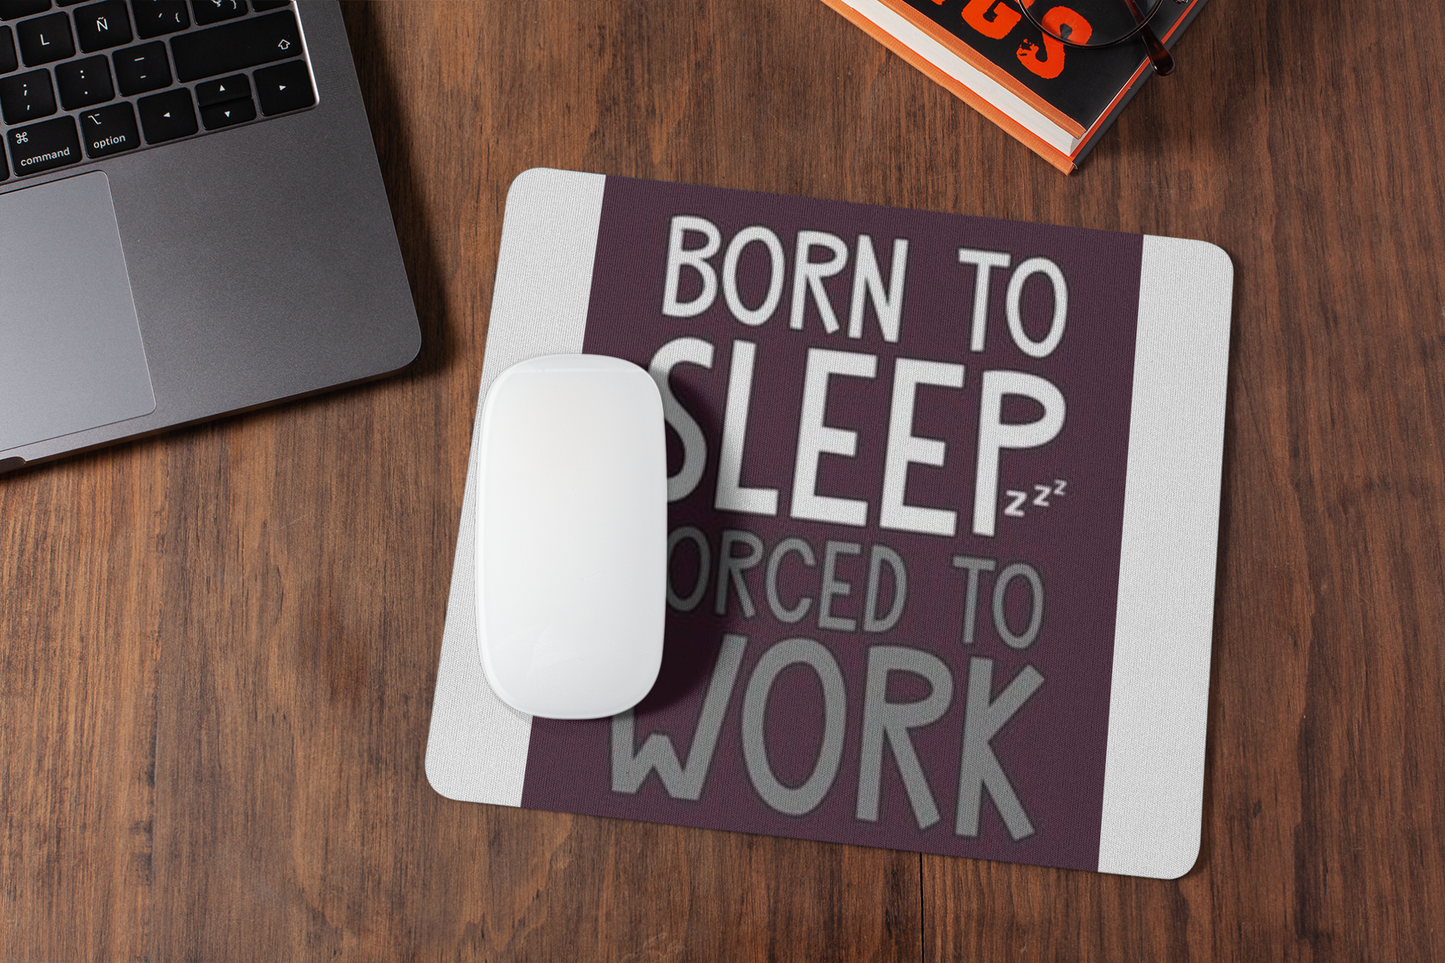 Born to sleep forced to work mousepad for laptop and desktop with Rubber Base - Anti Skid